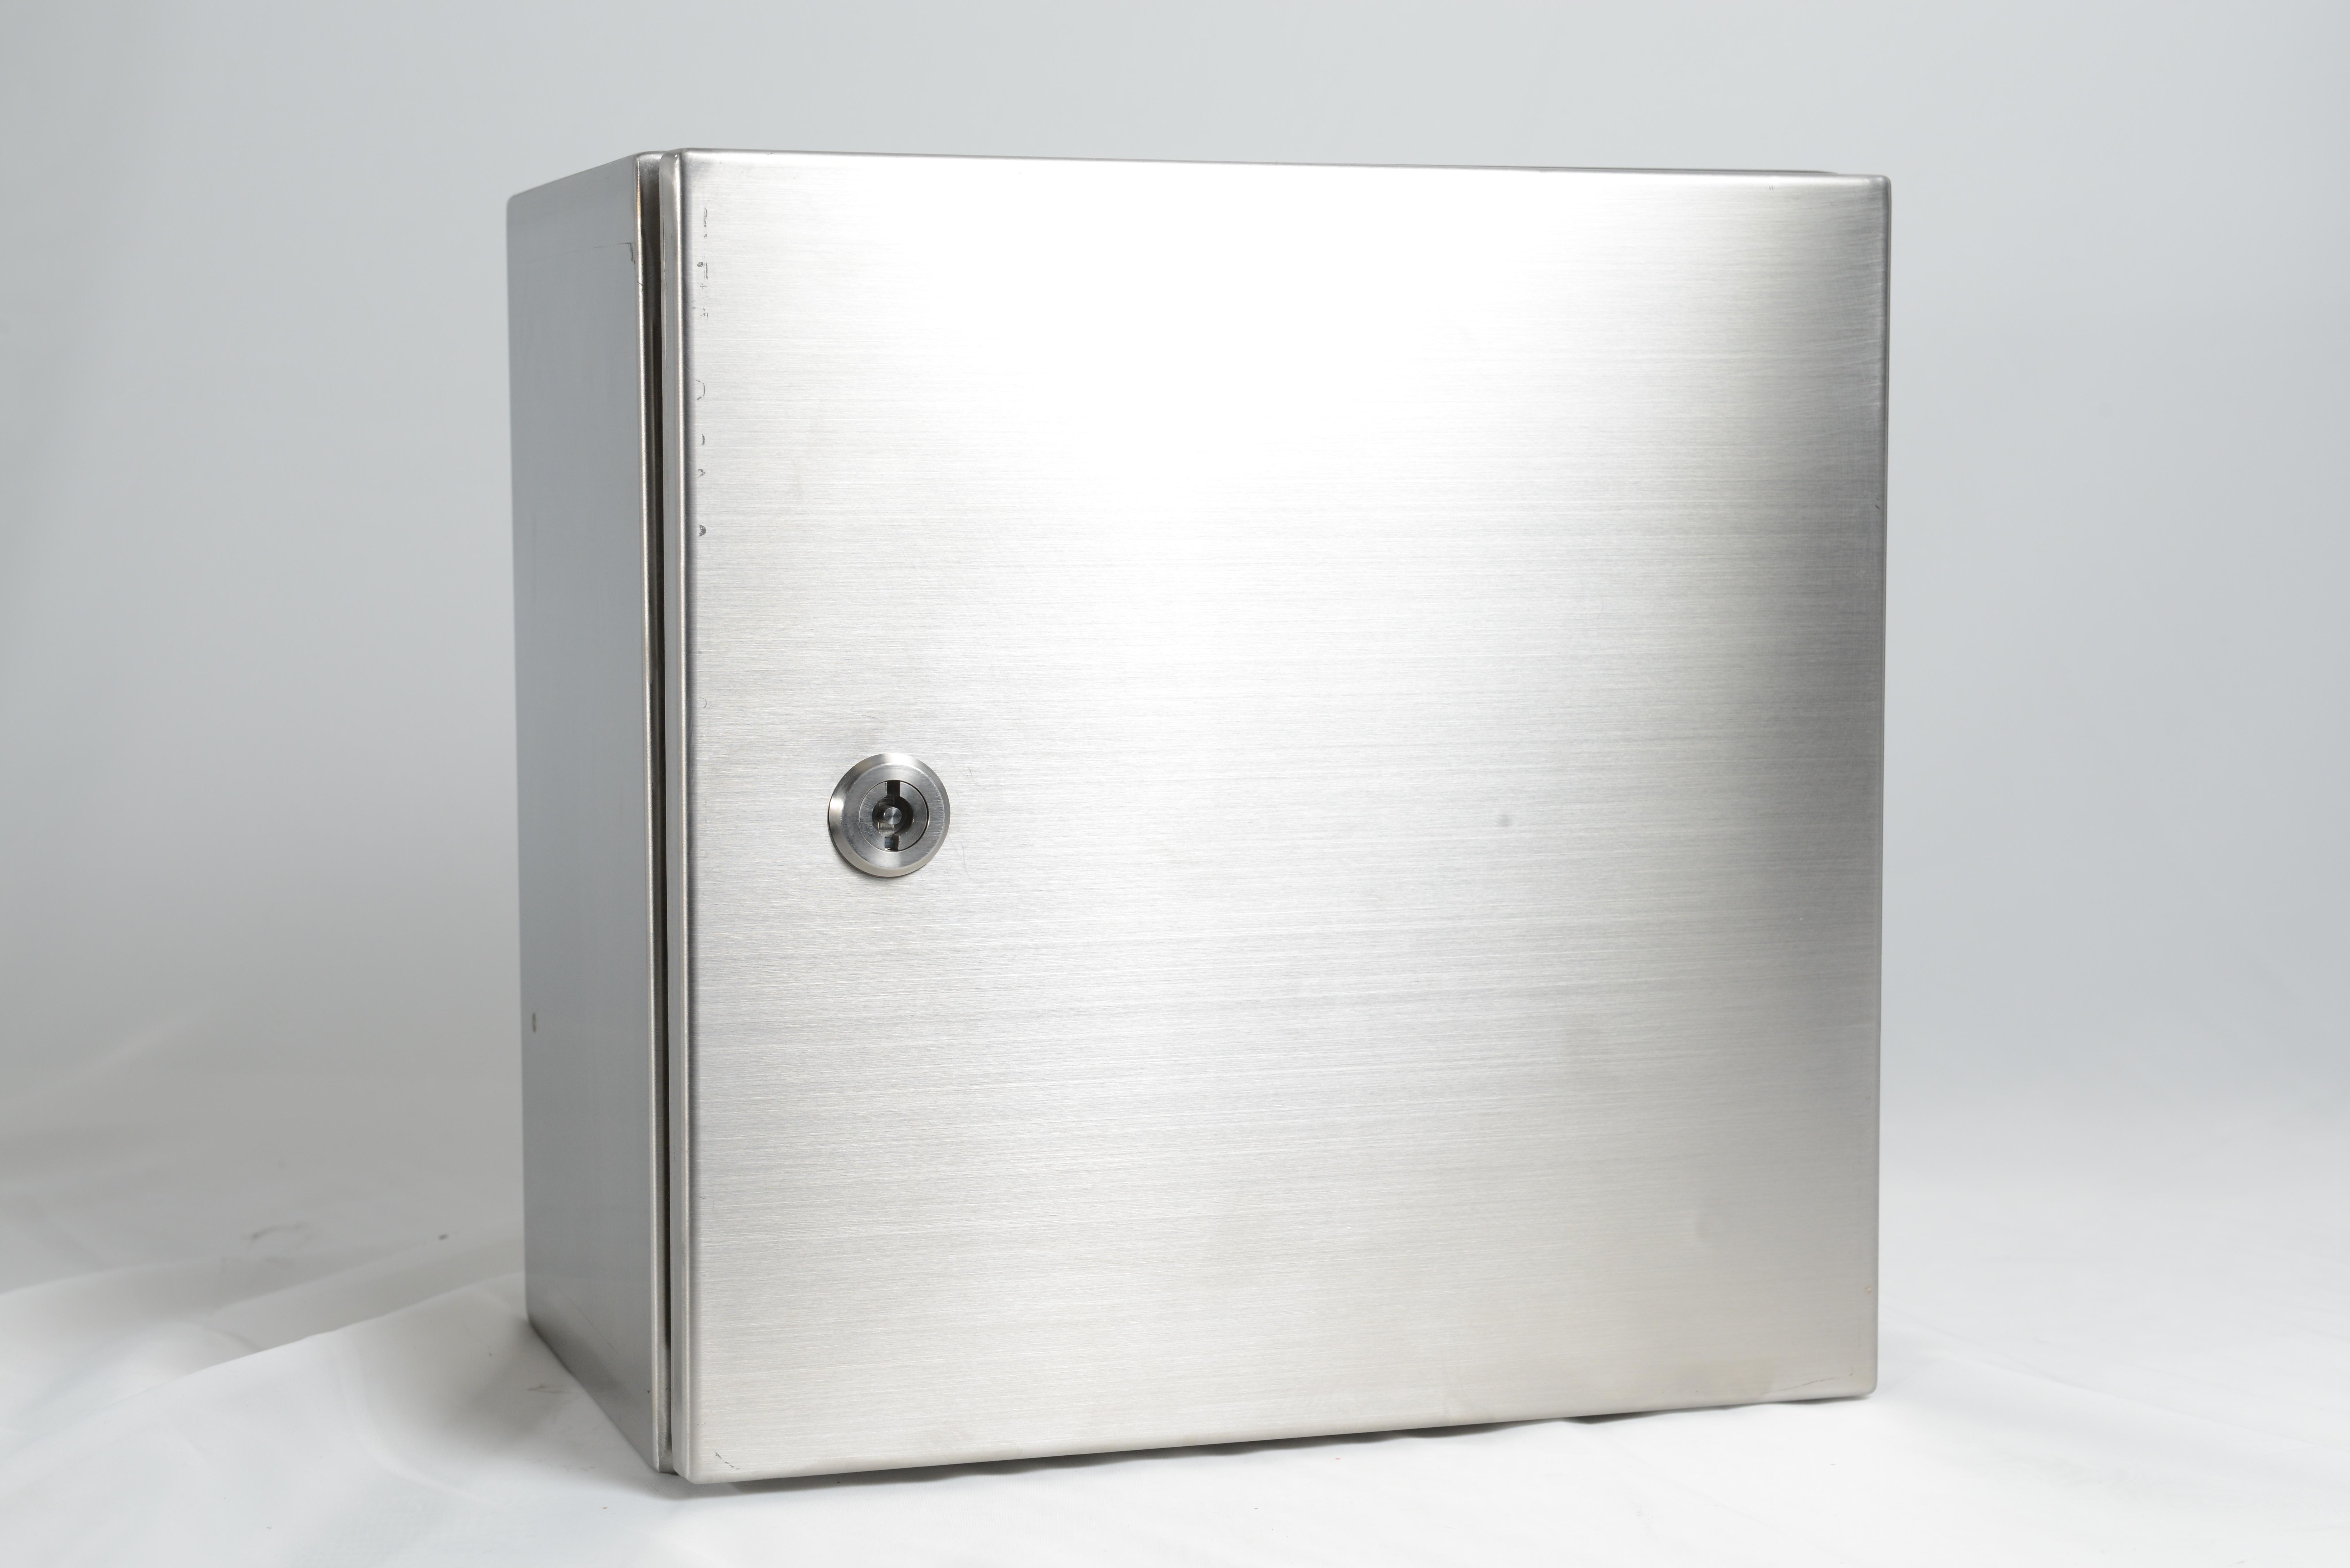 RCG stainless steel enclosure 316 grade 400x300x250mm - wall mounting